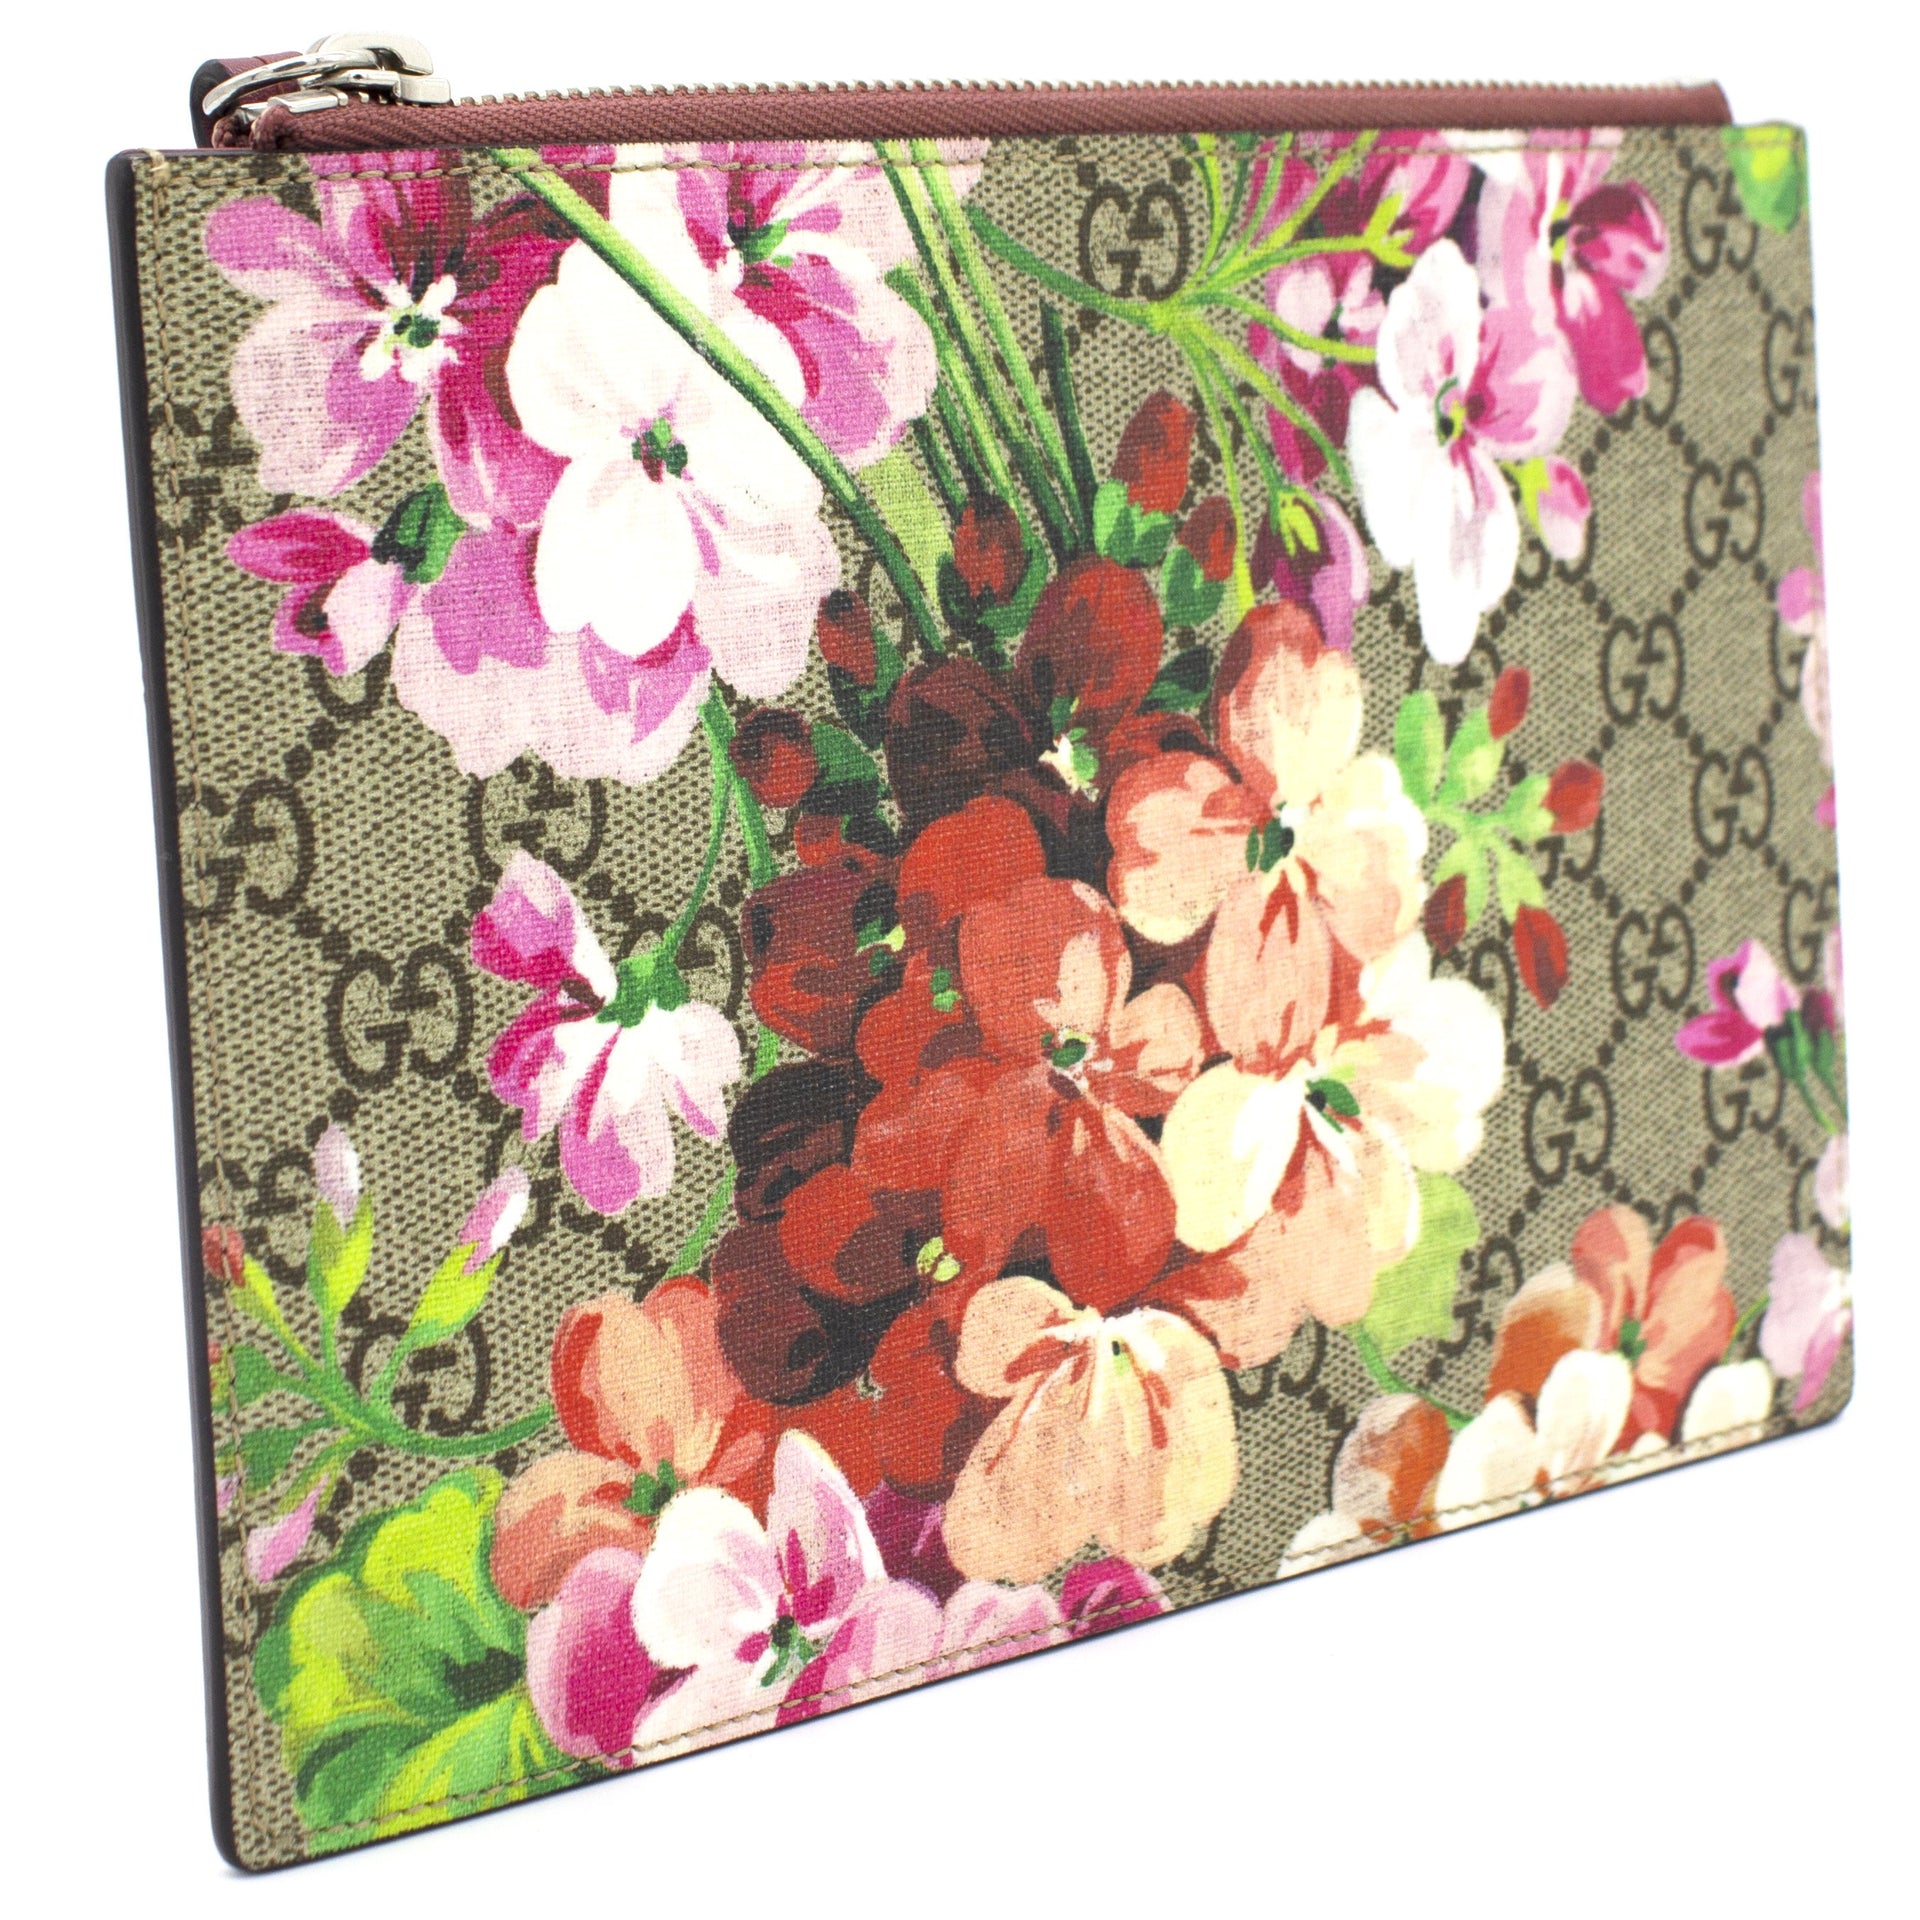 NEW GUCCI GG Blooms Pouch Pink Monogram Coated Canvas Clutch 410079